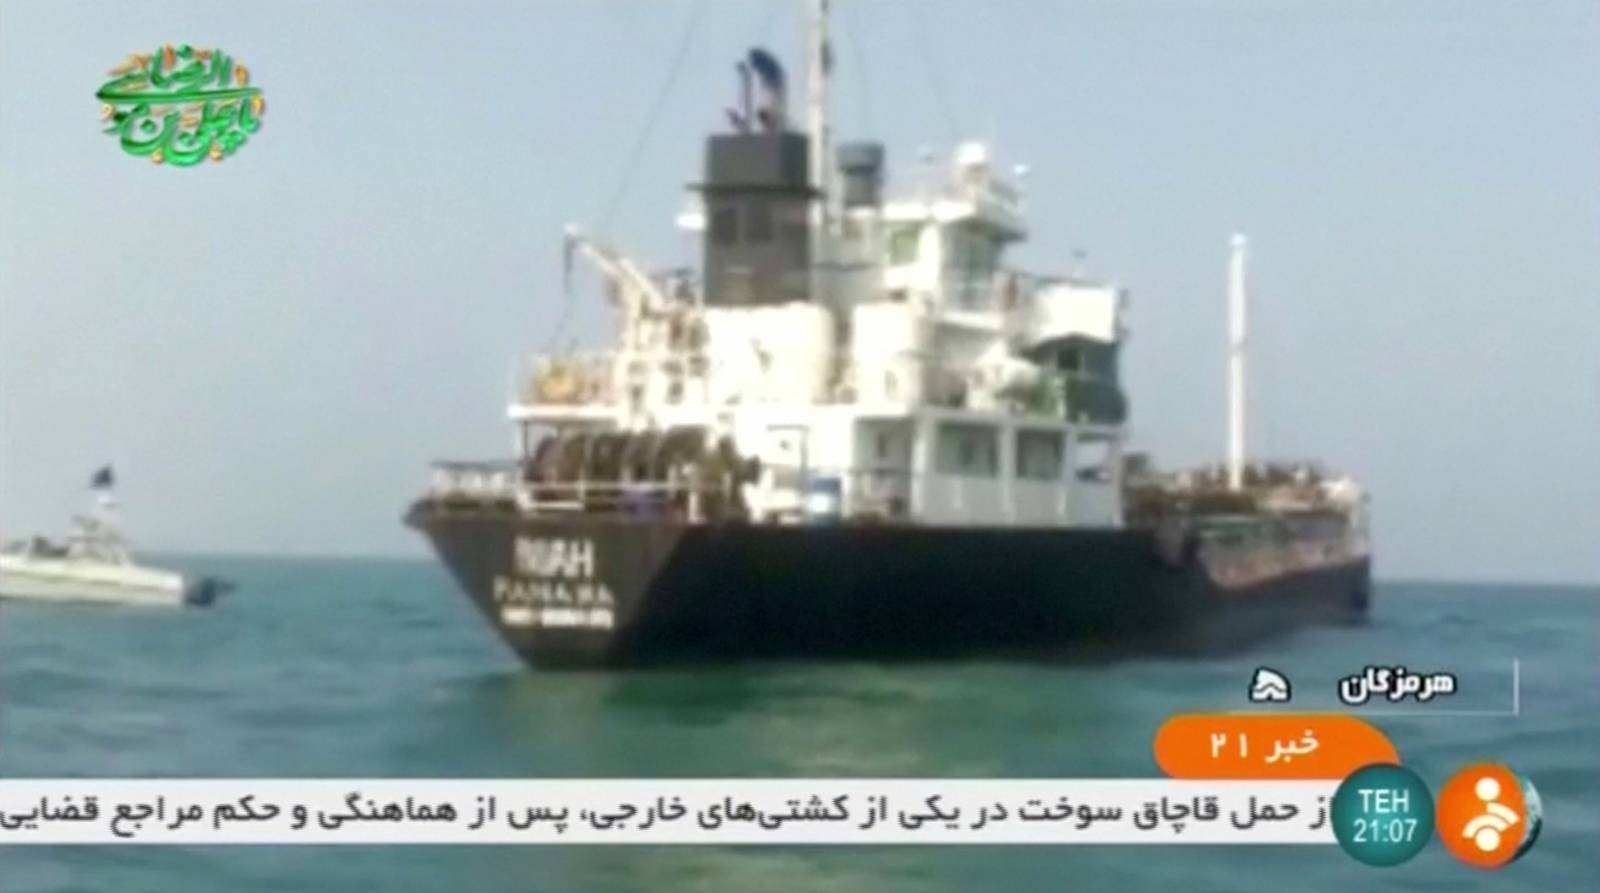 Tanker called "RIAH" which, according to Iranian State TV, was smuggling fuel in the Gulf, is seen in this screen grab obtained from a video